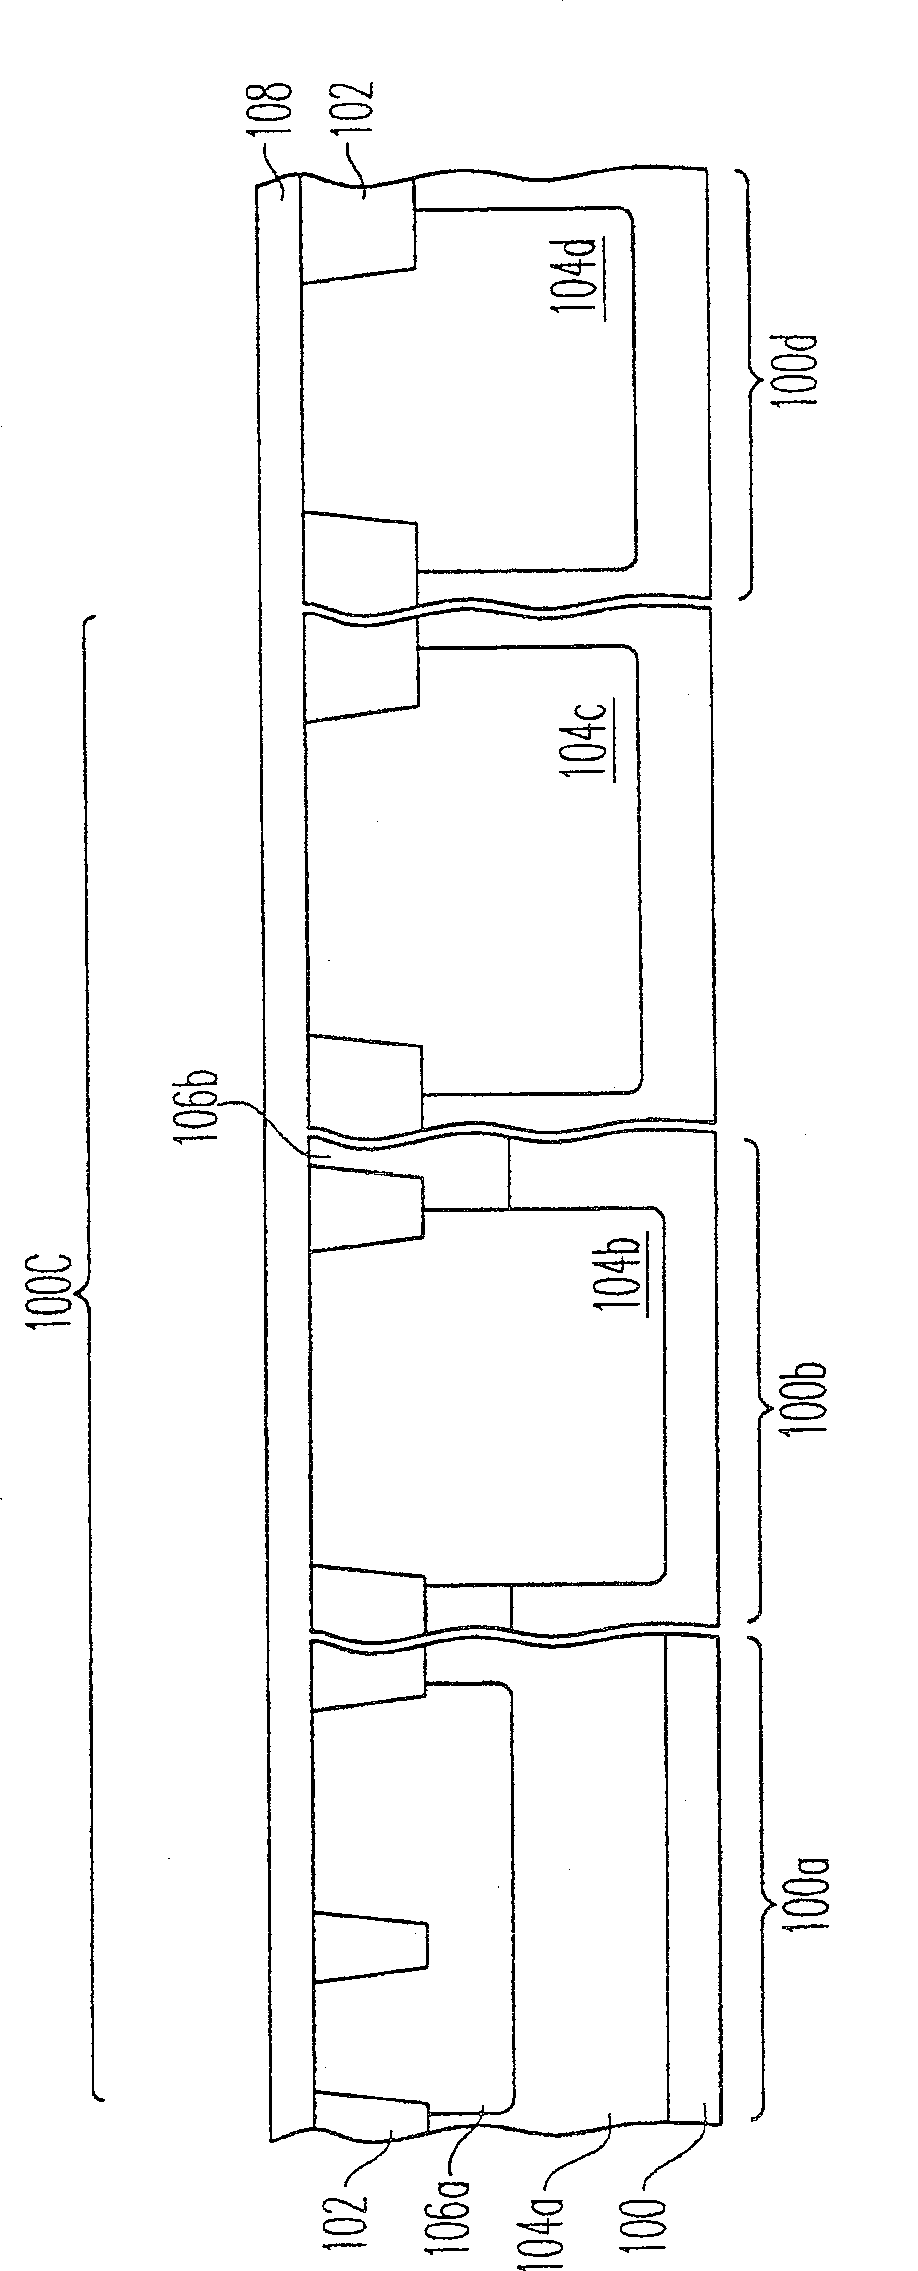 Method for manufacturing single level polysilicon electric removal and programmable read only memory cell